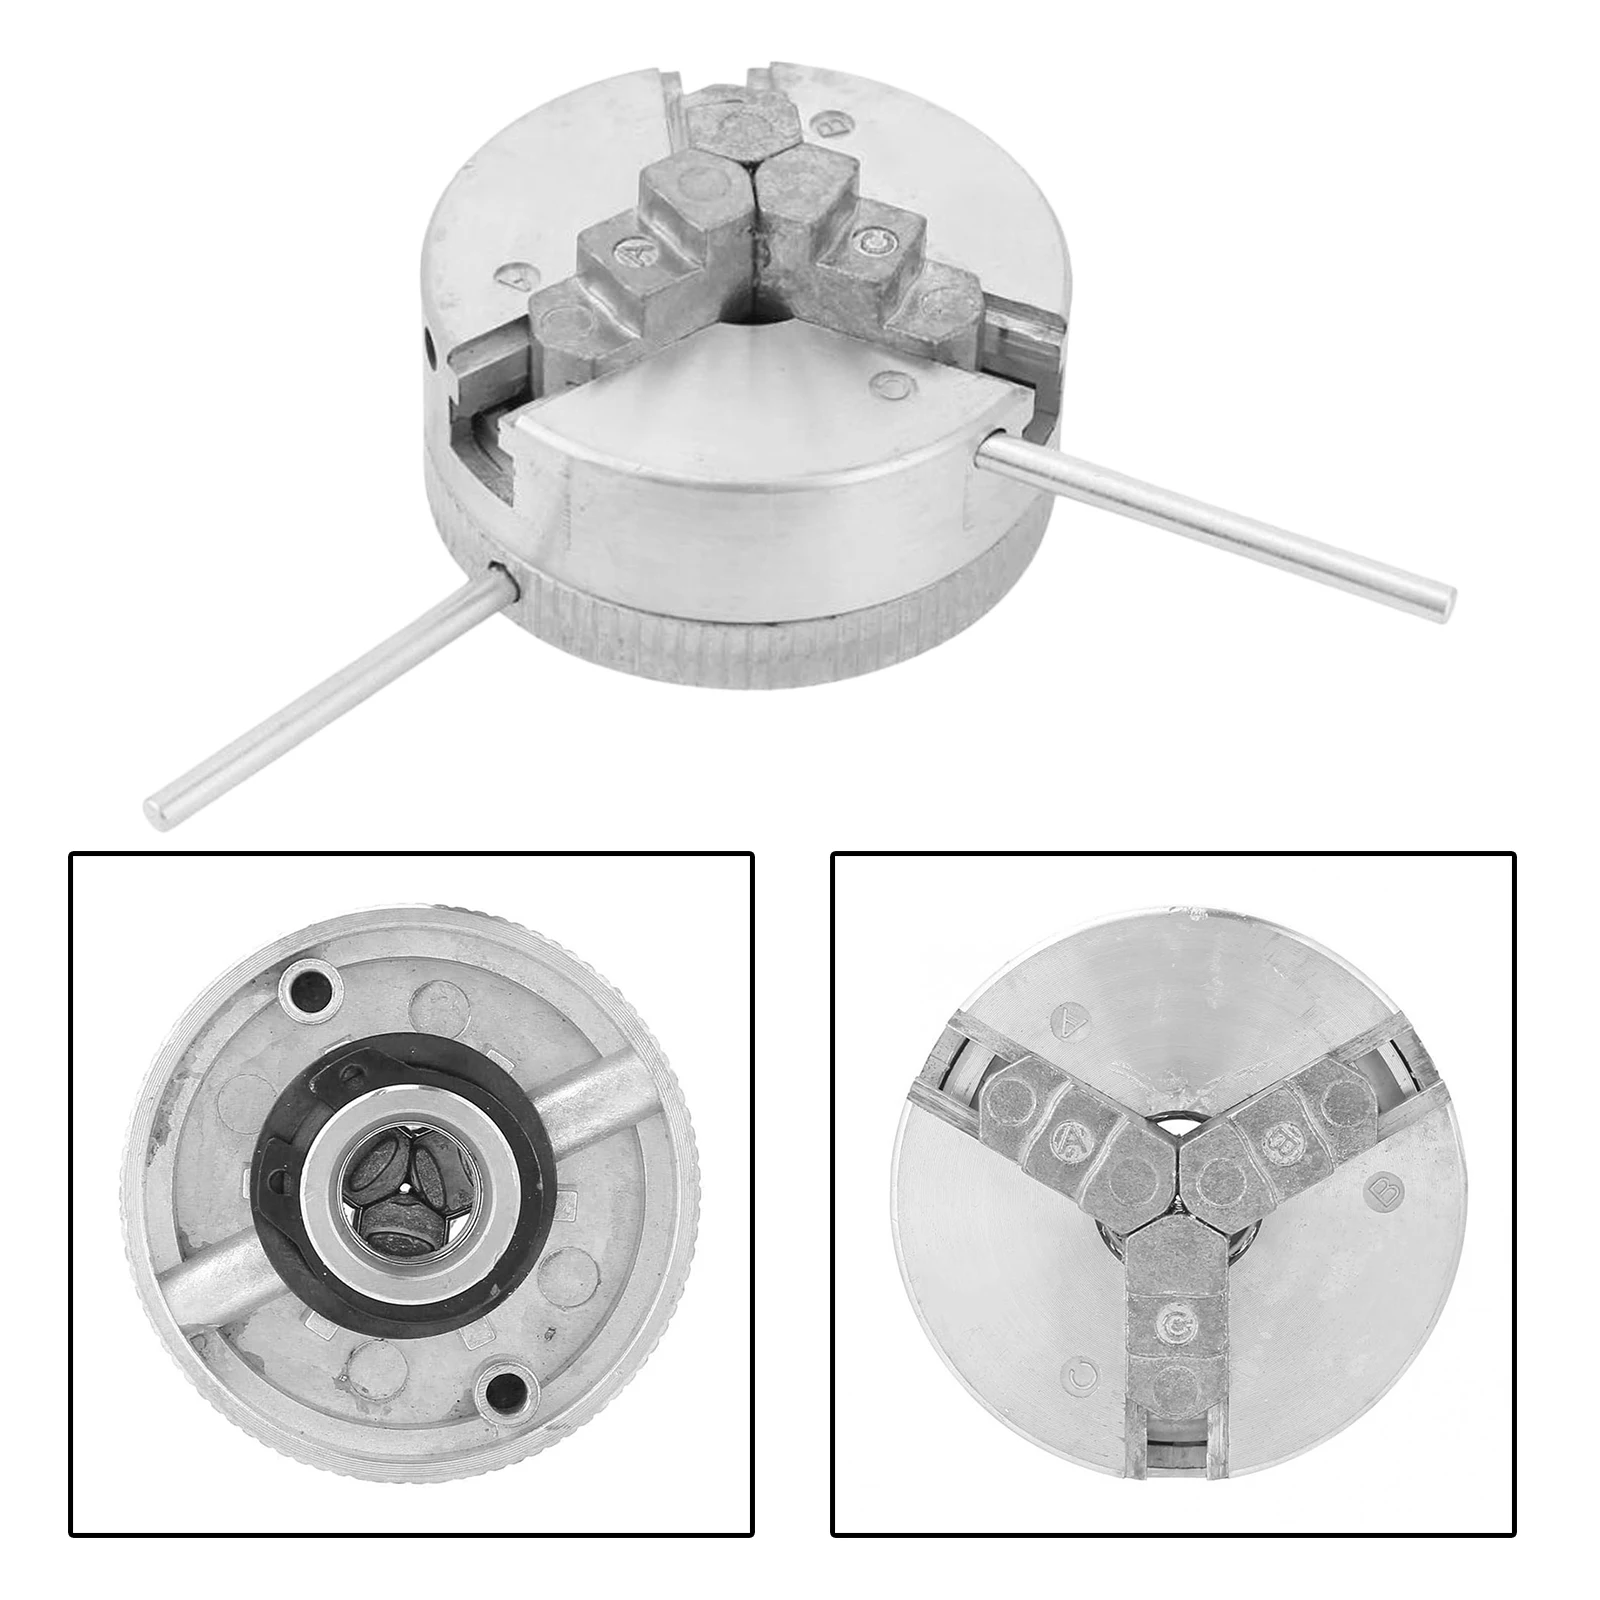 Three-Jaw Chuck with 2 Adjustment Lever, Self Centering Lathe Chuck for Woodworking Lathe, Clamping Diameter 1.8~56 mm/12~65 mm